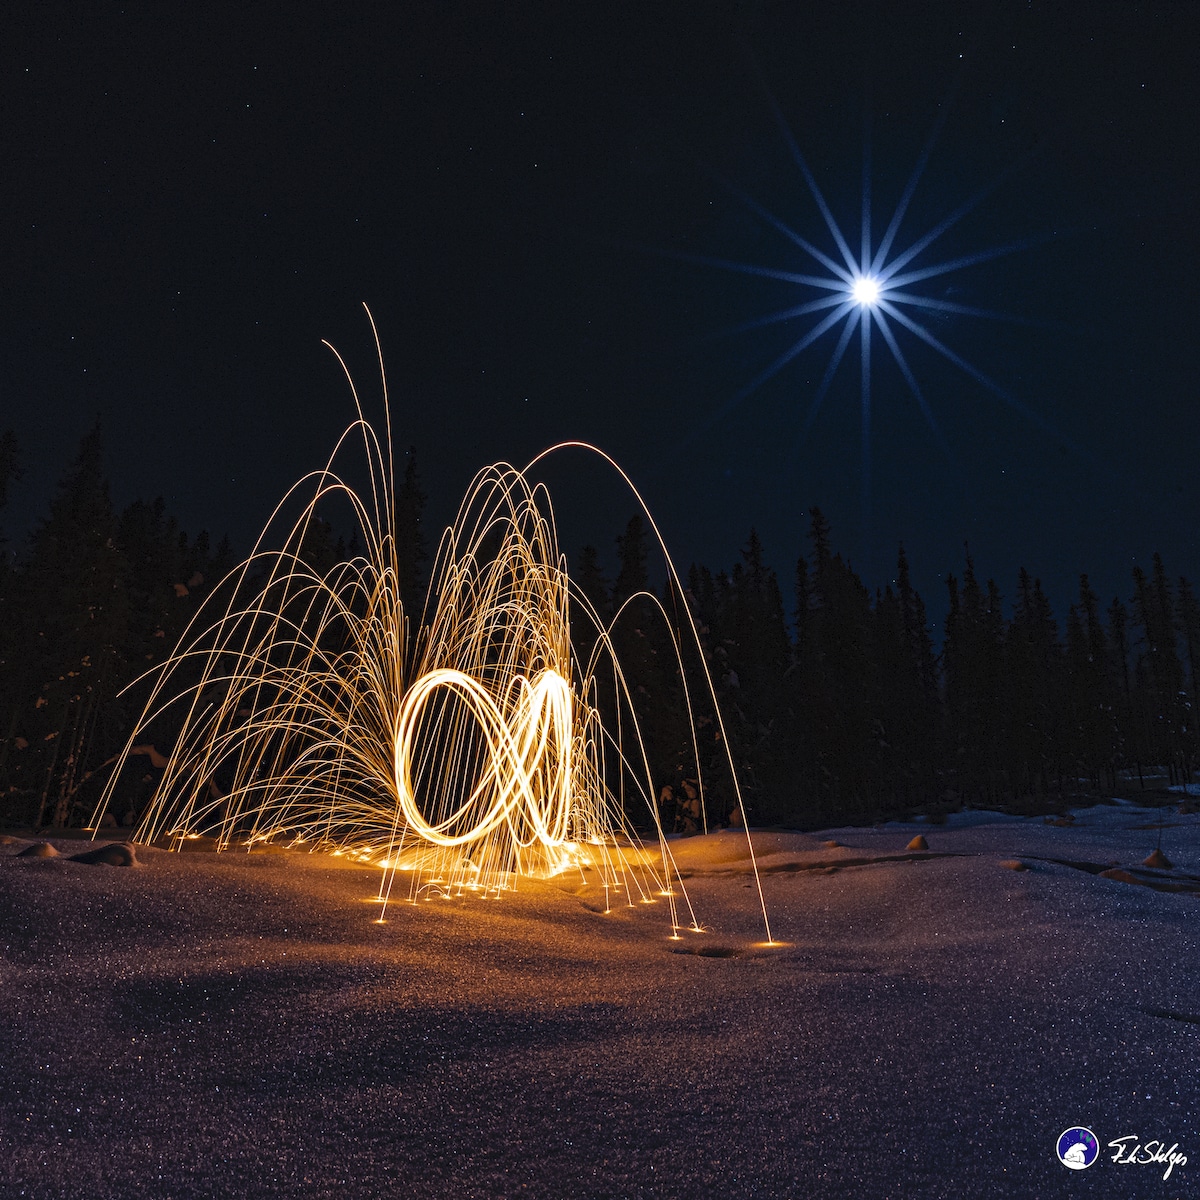 Unique Steel Wool Photography by Frank Stelges